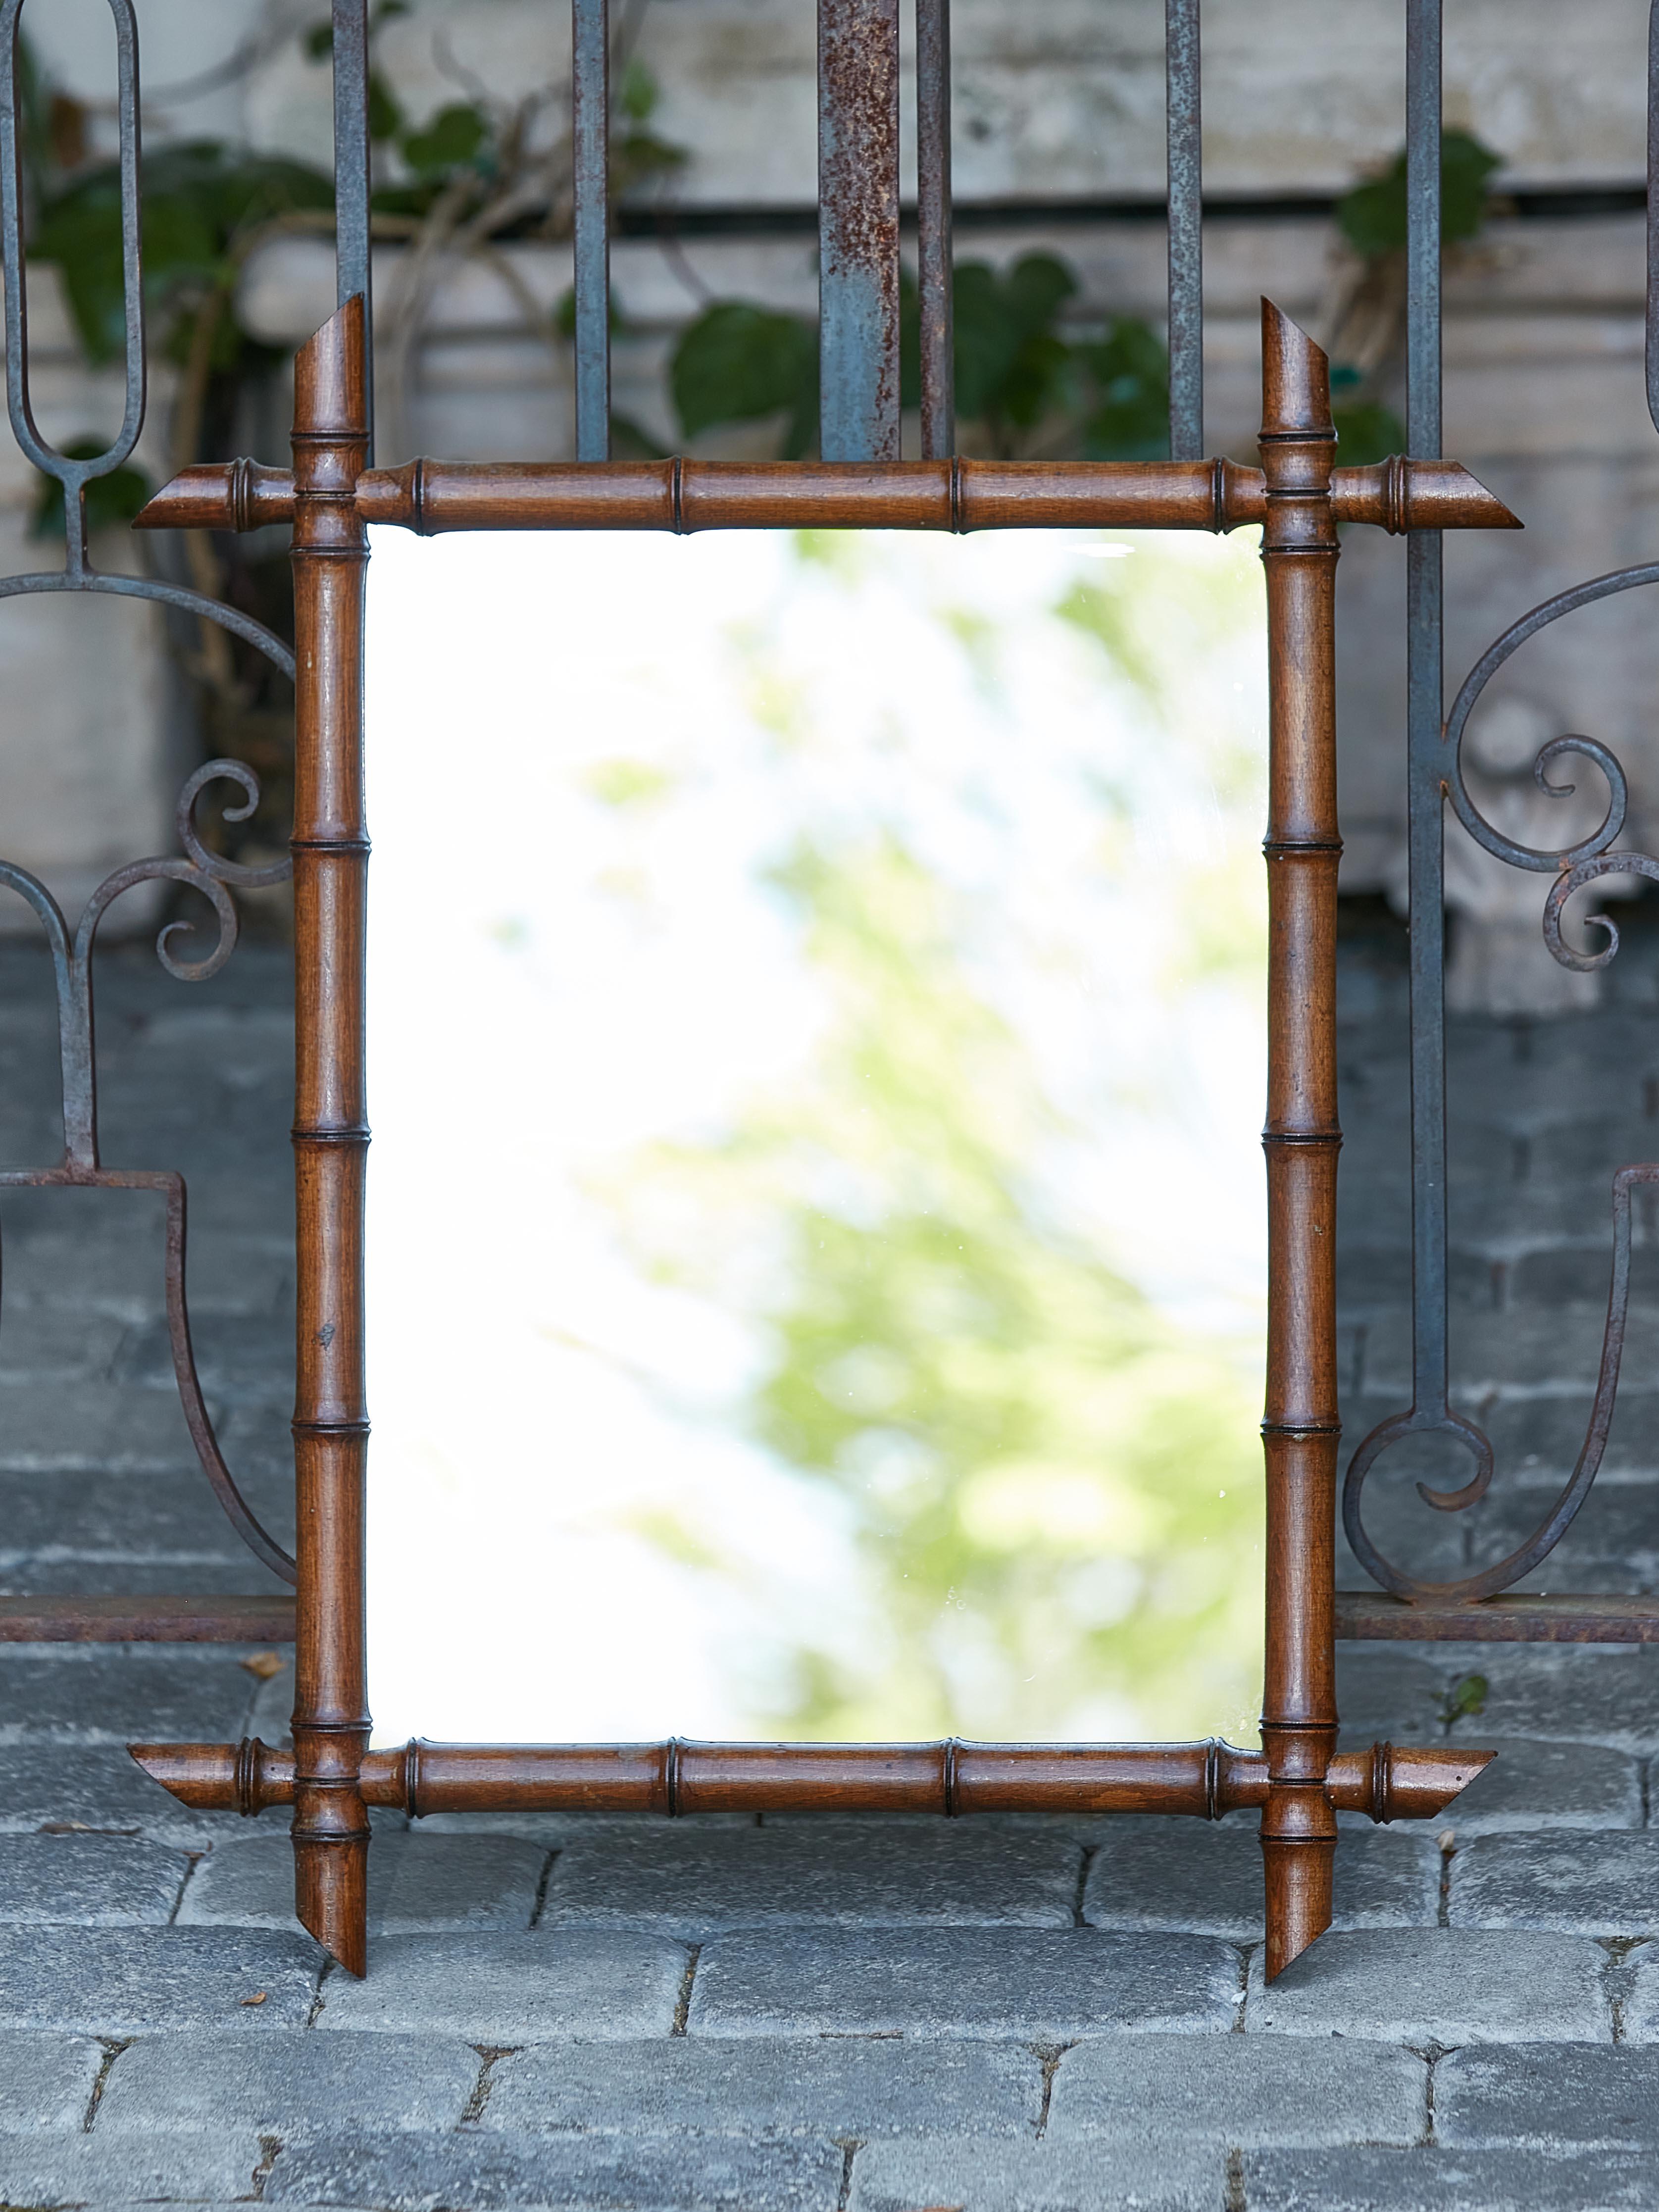 A French Turn of the Century faux-bamboo mirror from circa 1900 with intersecting corners, slanted accents and deep brown color. Imbue your living space with the rustic elegance of this French Turn of the Century faux-bamboo mirror, a period gem